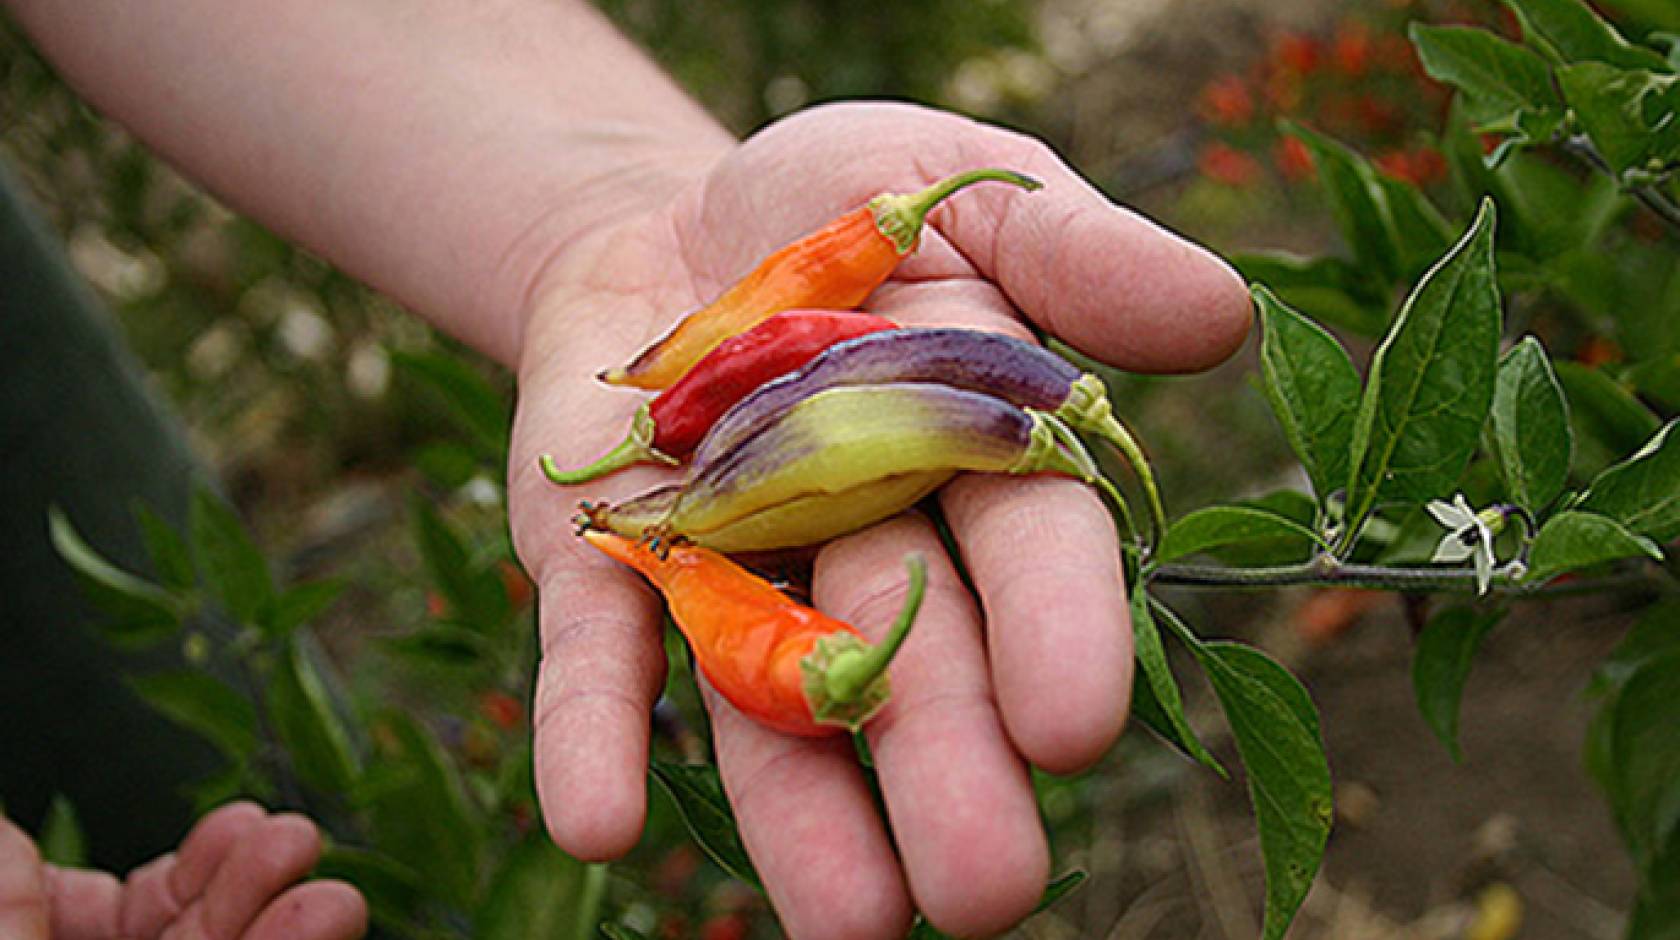 Breeding of diverse varieties like these peppers, bred at the Student Farm at UC Davis, is increasingly important for organic growers.